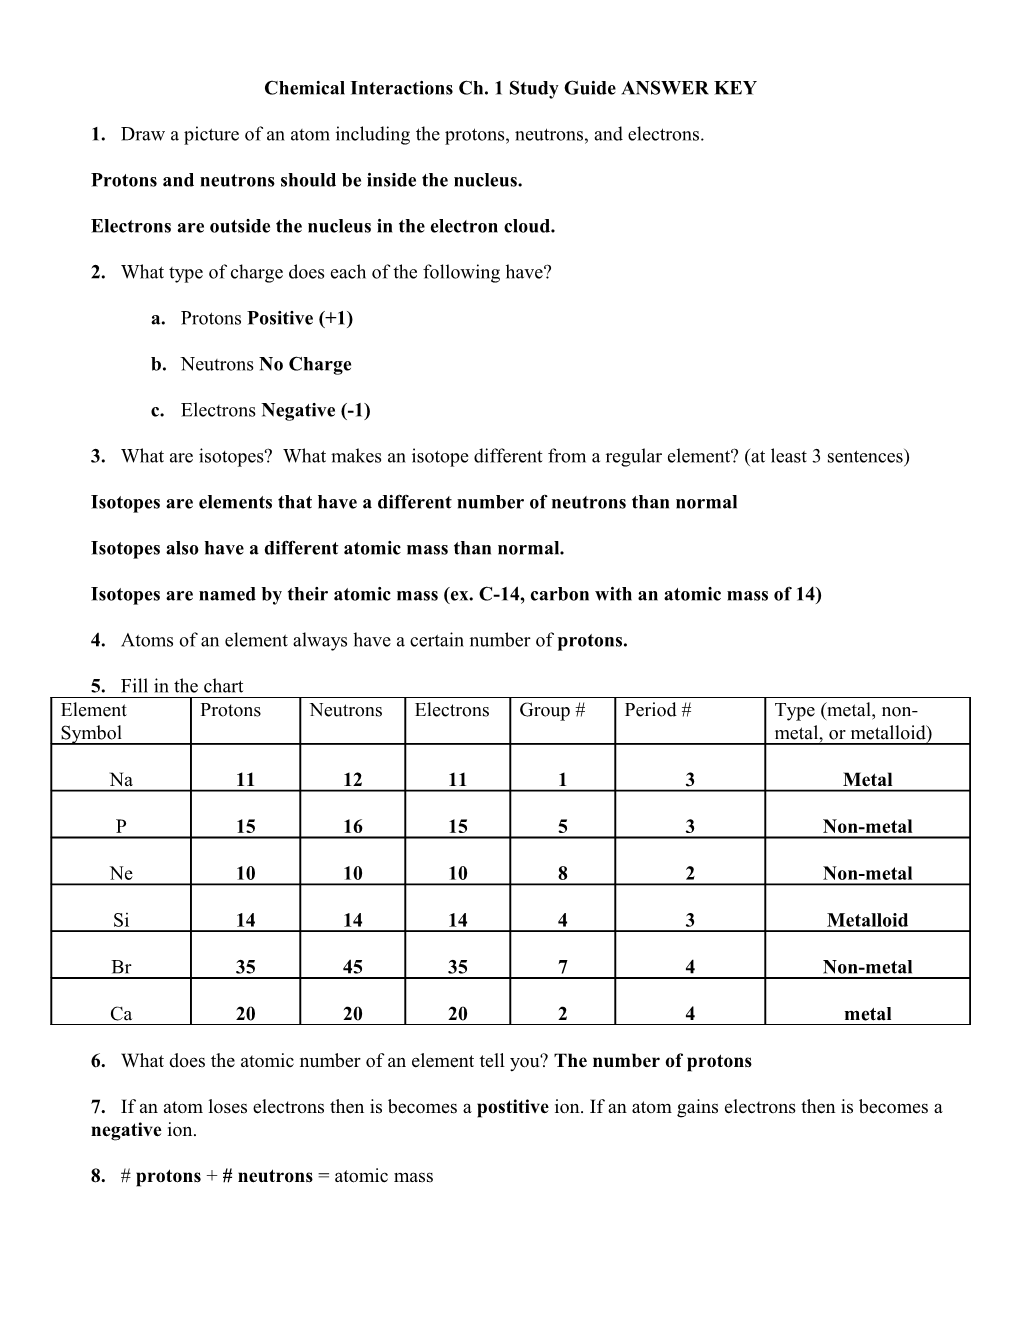 Chemical Interactions Ch. 1 Study Guide ANSWER KEY